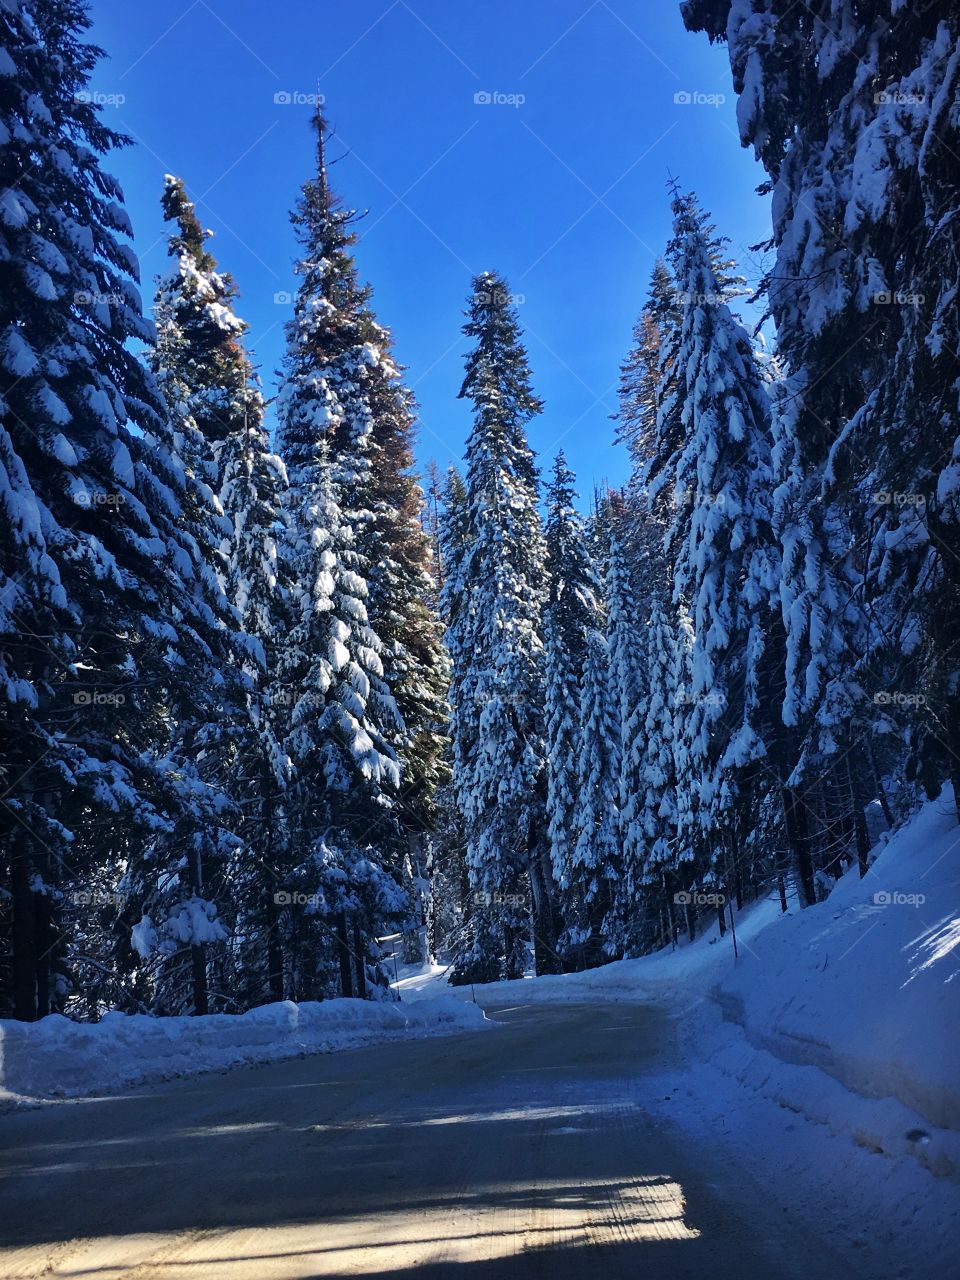 Winter wonderland in the Sequoia National Forest